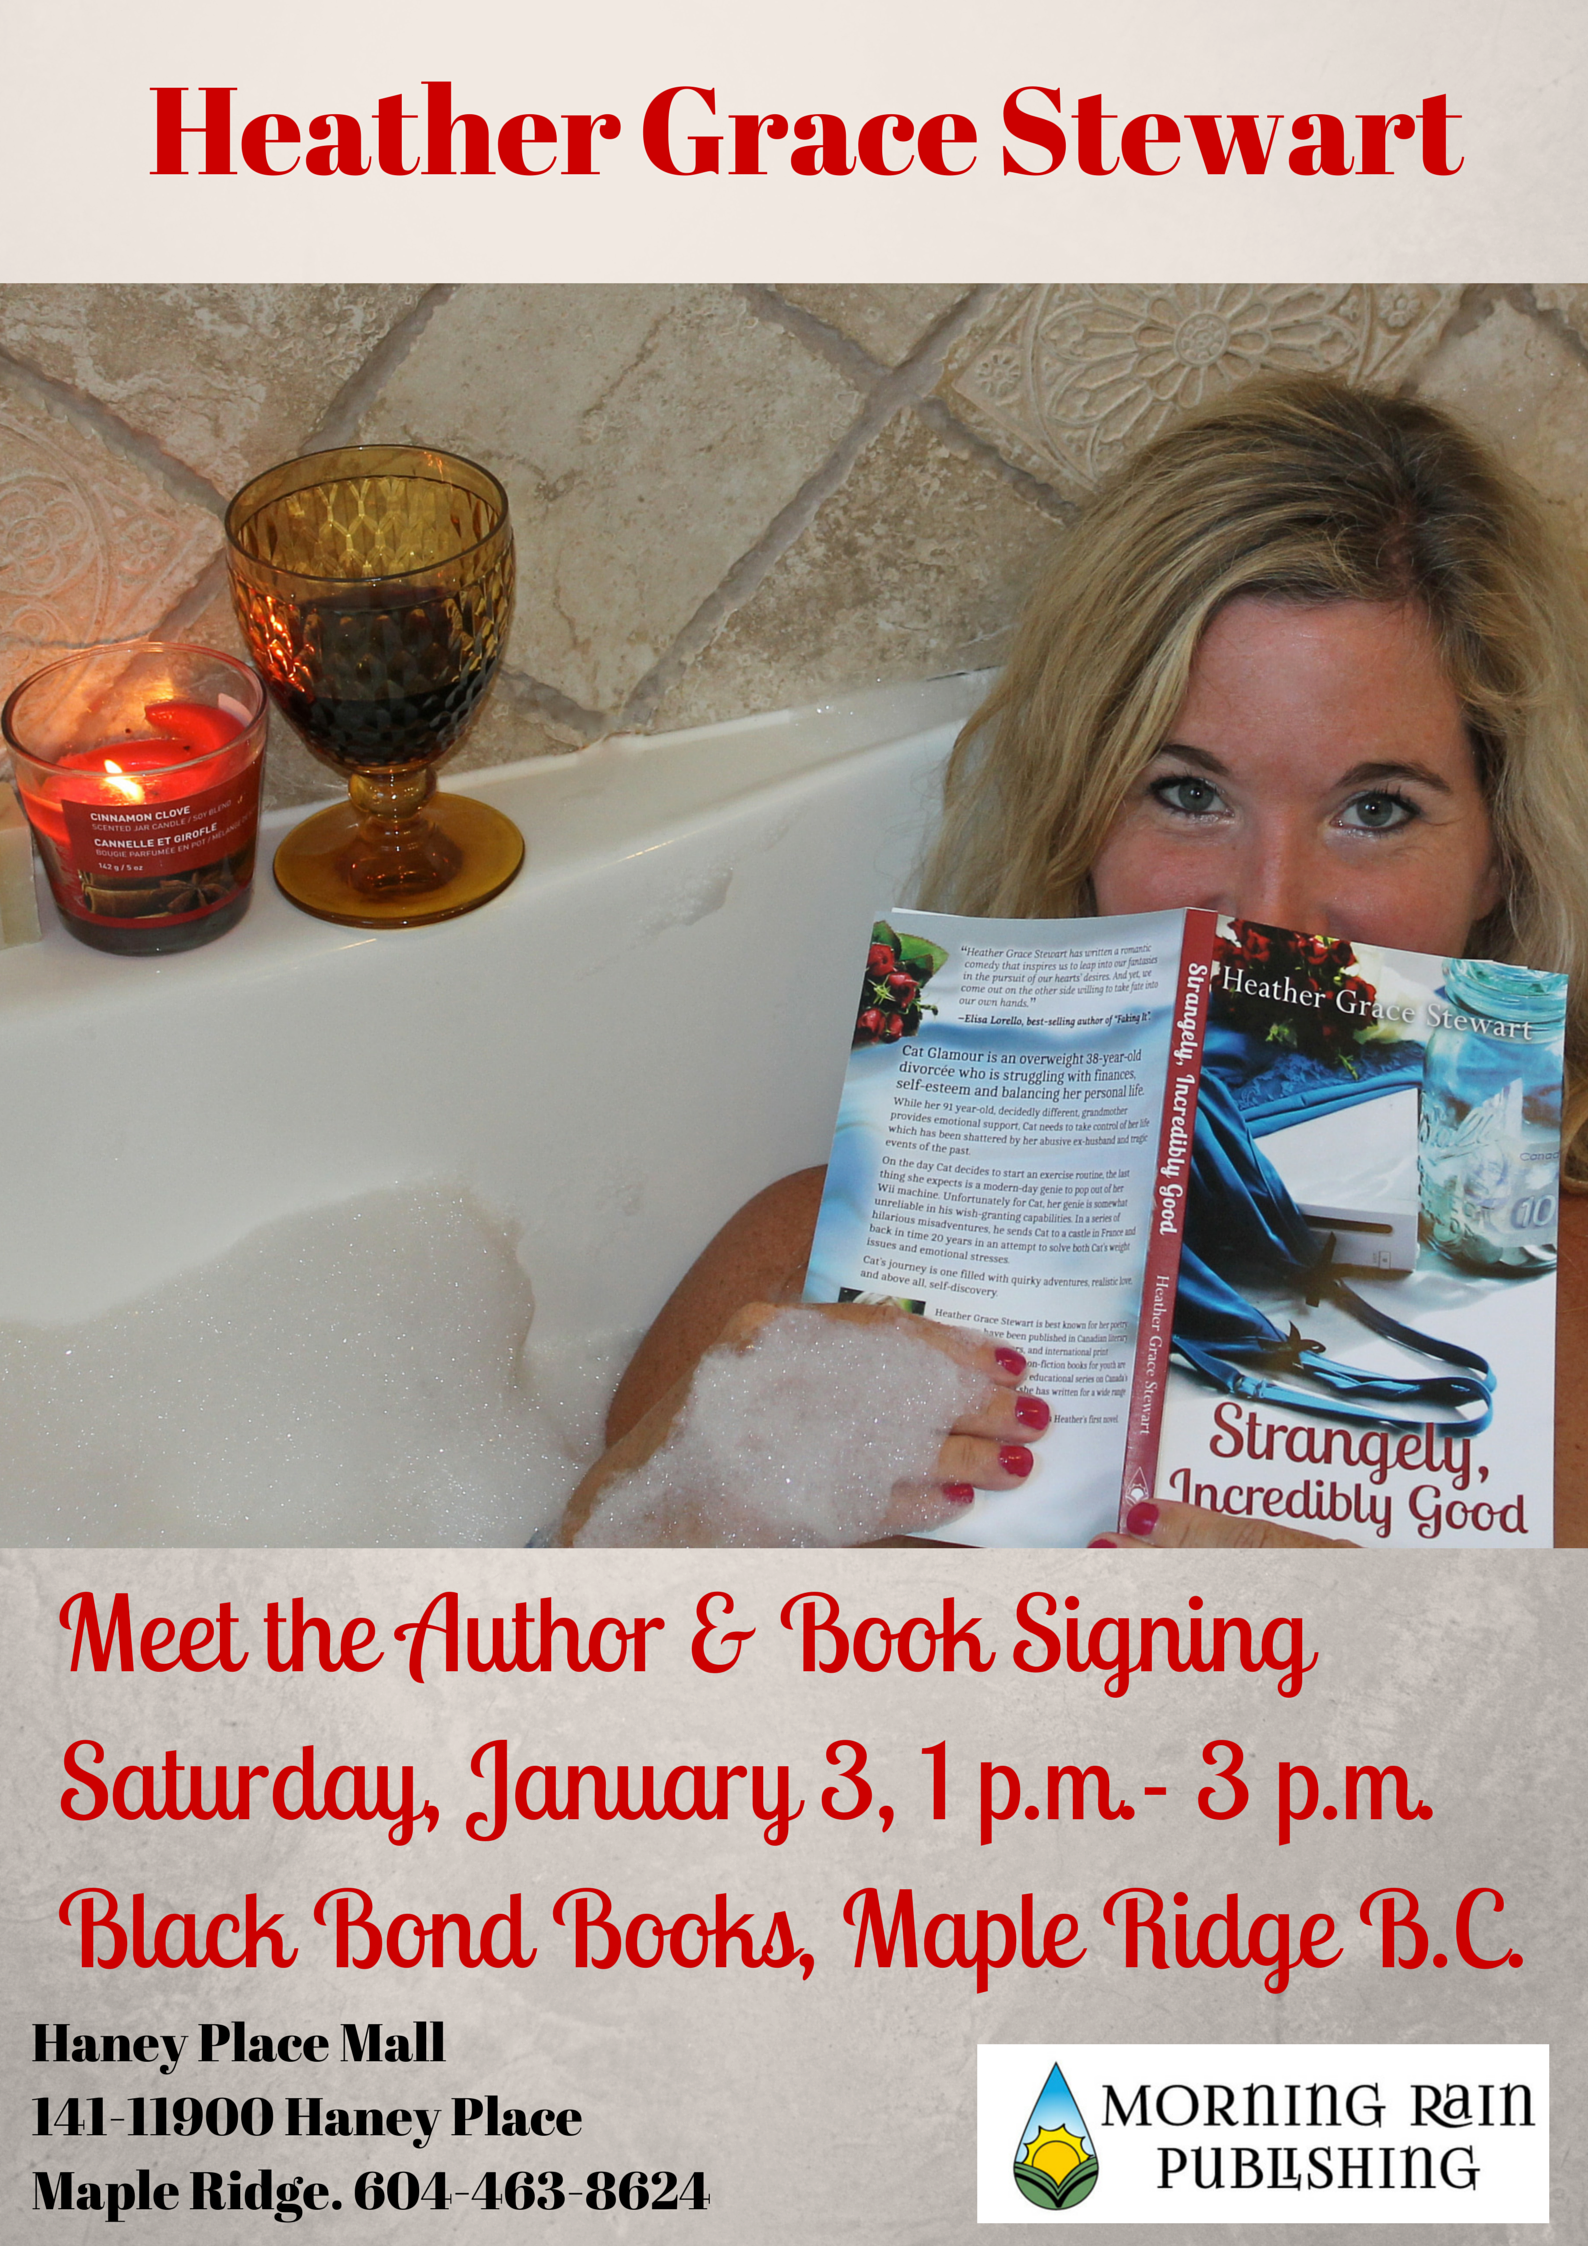 Author Heather Grace Stewart will appear at Black Bond Books January 3 from 1-3 p.m. 